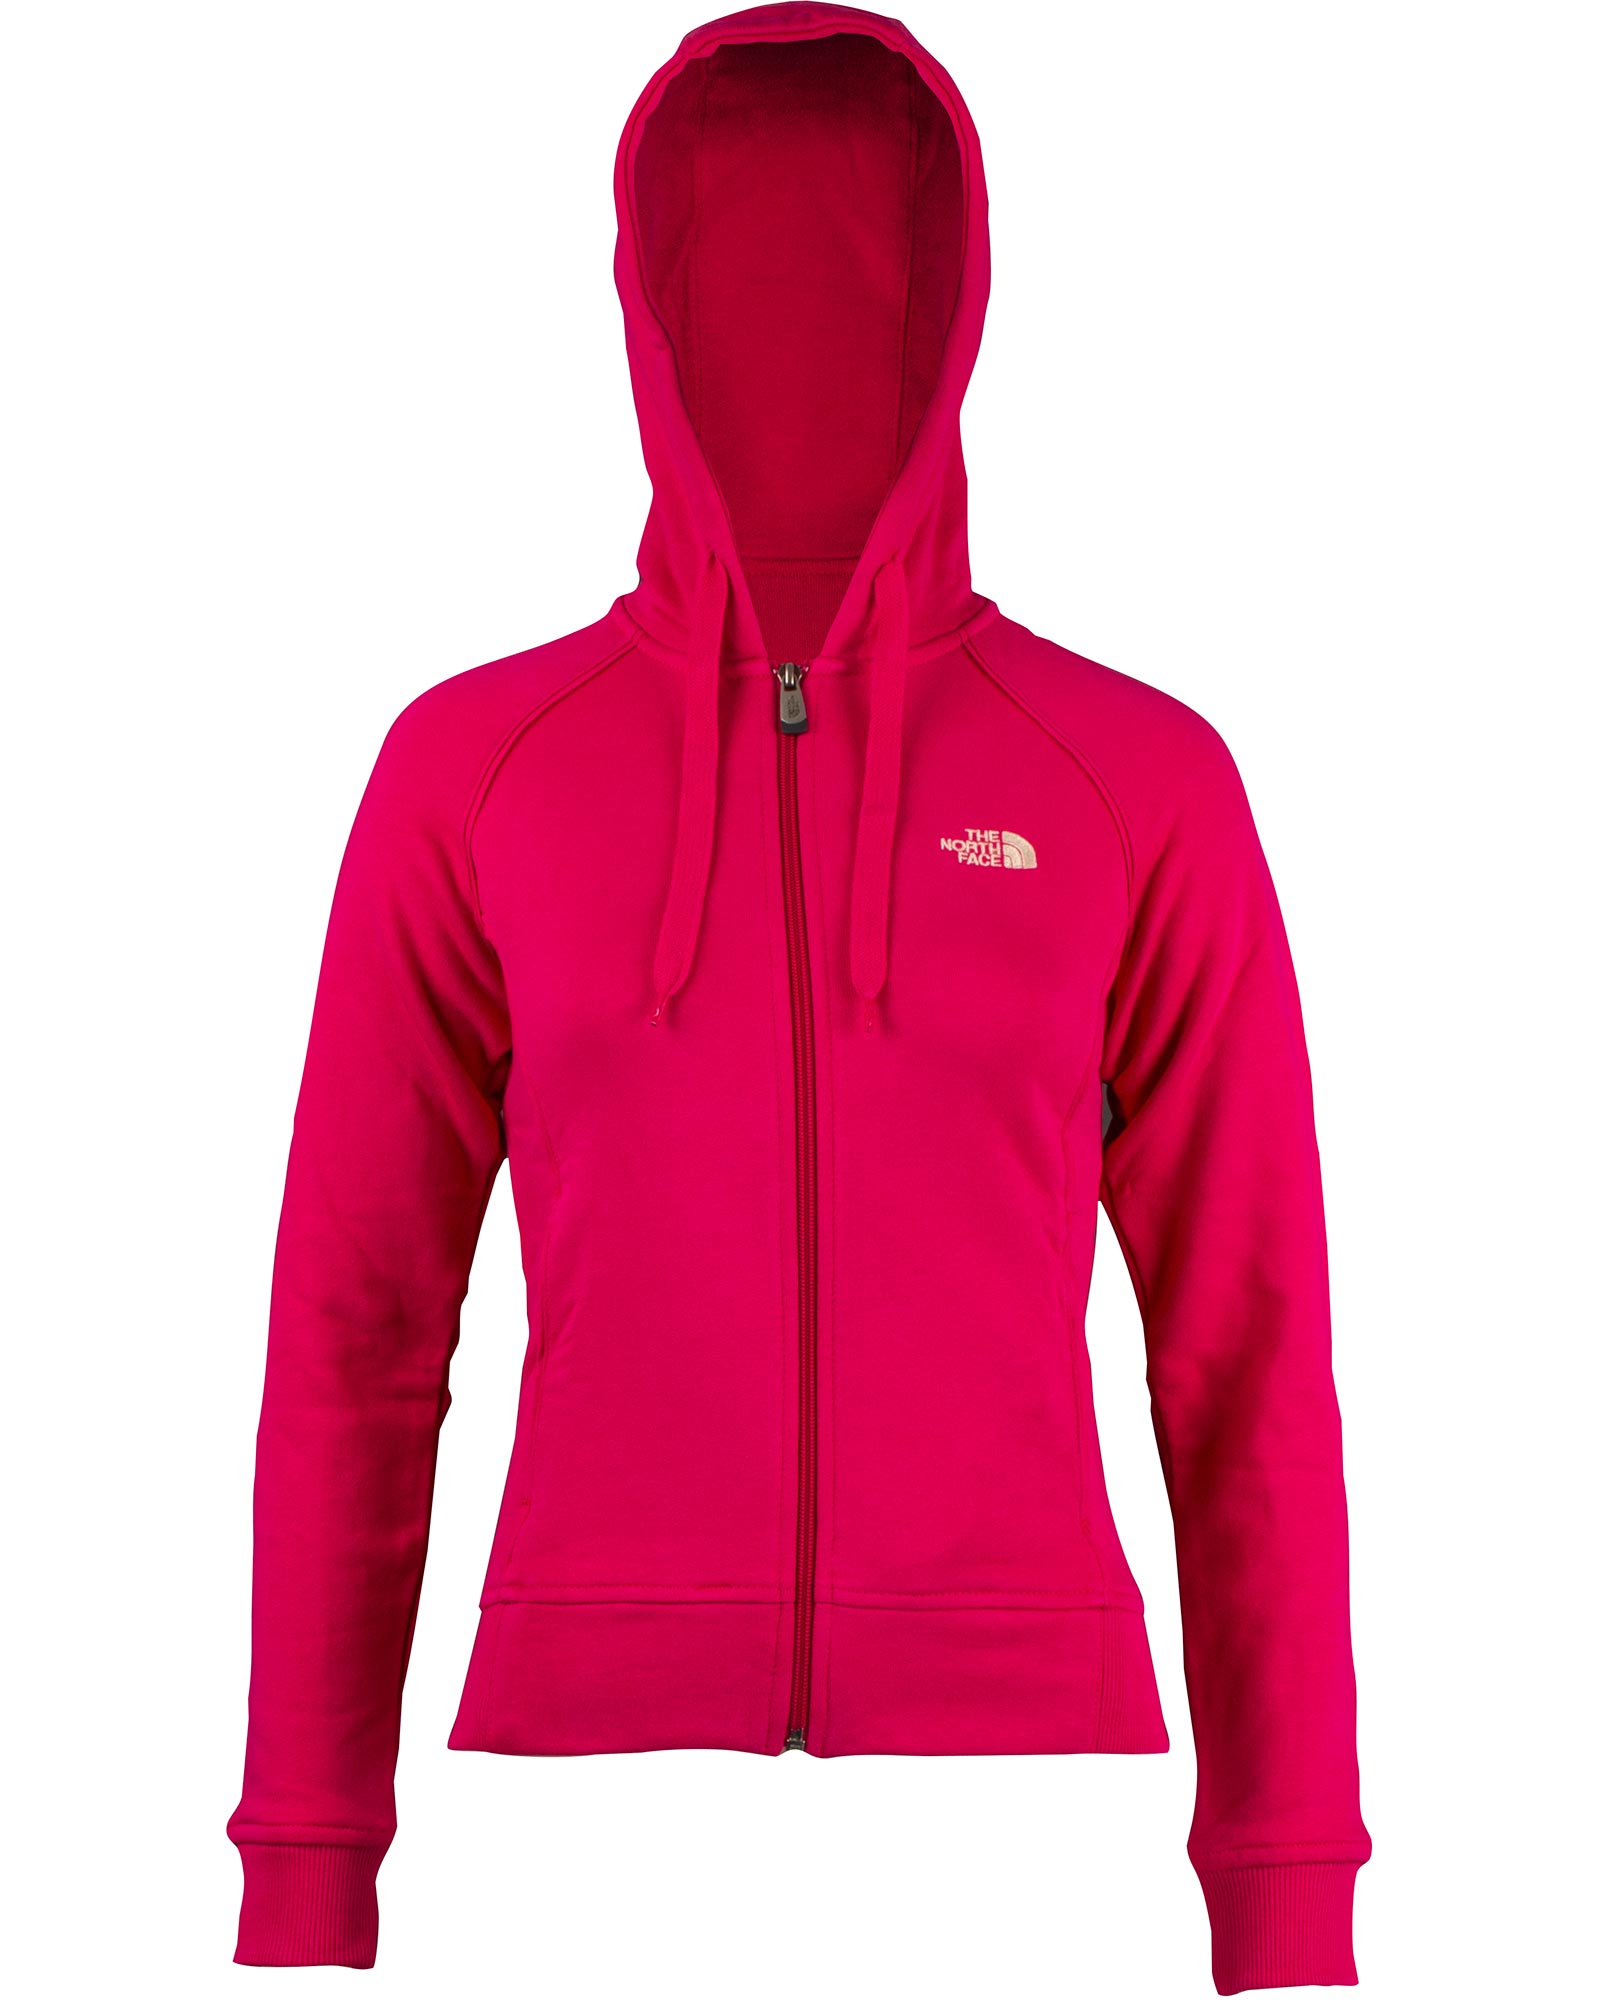 The North Face Junipet Women’s Full Zip Hoodie - Fusion Pink XS